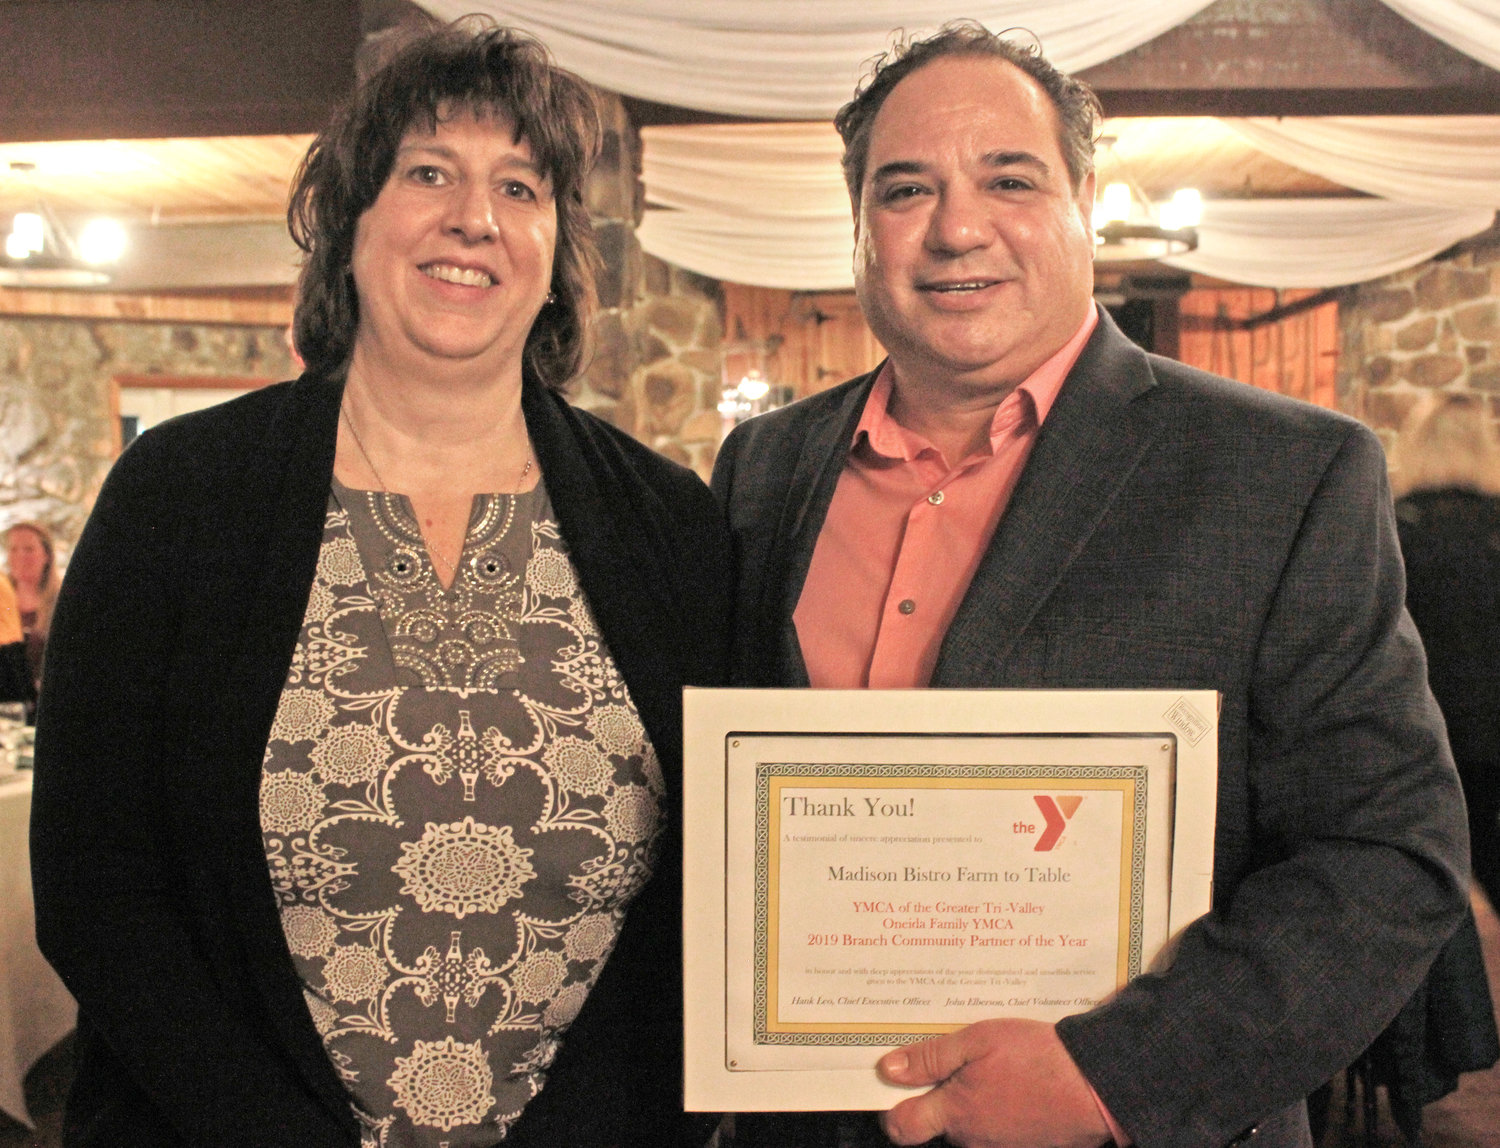 ONEIDA PARTNER — Madison Bistro was warded the Oneida Community Partner of the Year at the annual YMCA 2020 Recognition Program on Wednesday.